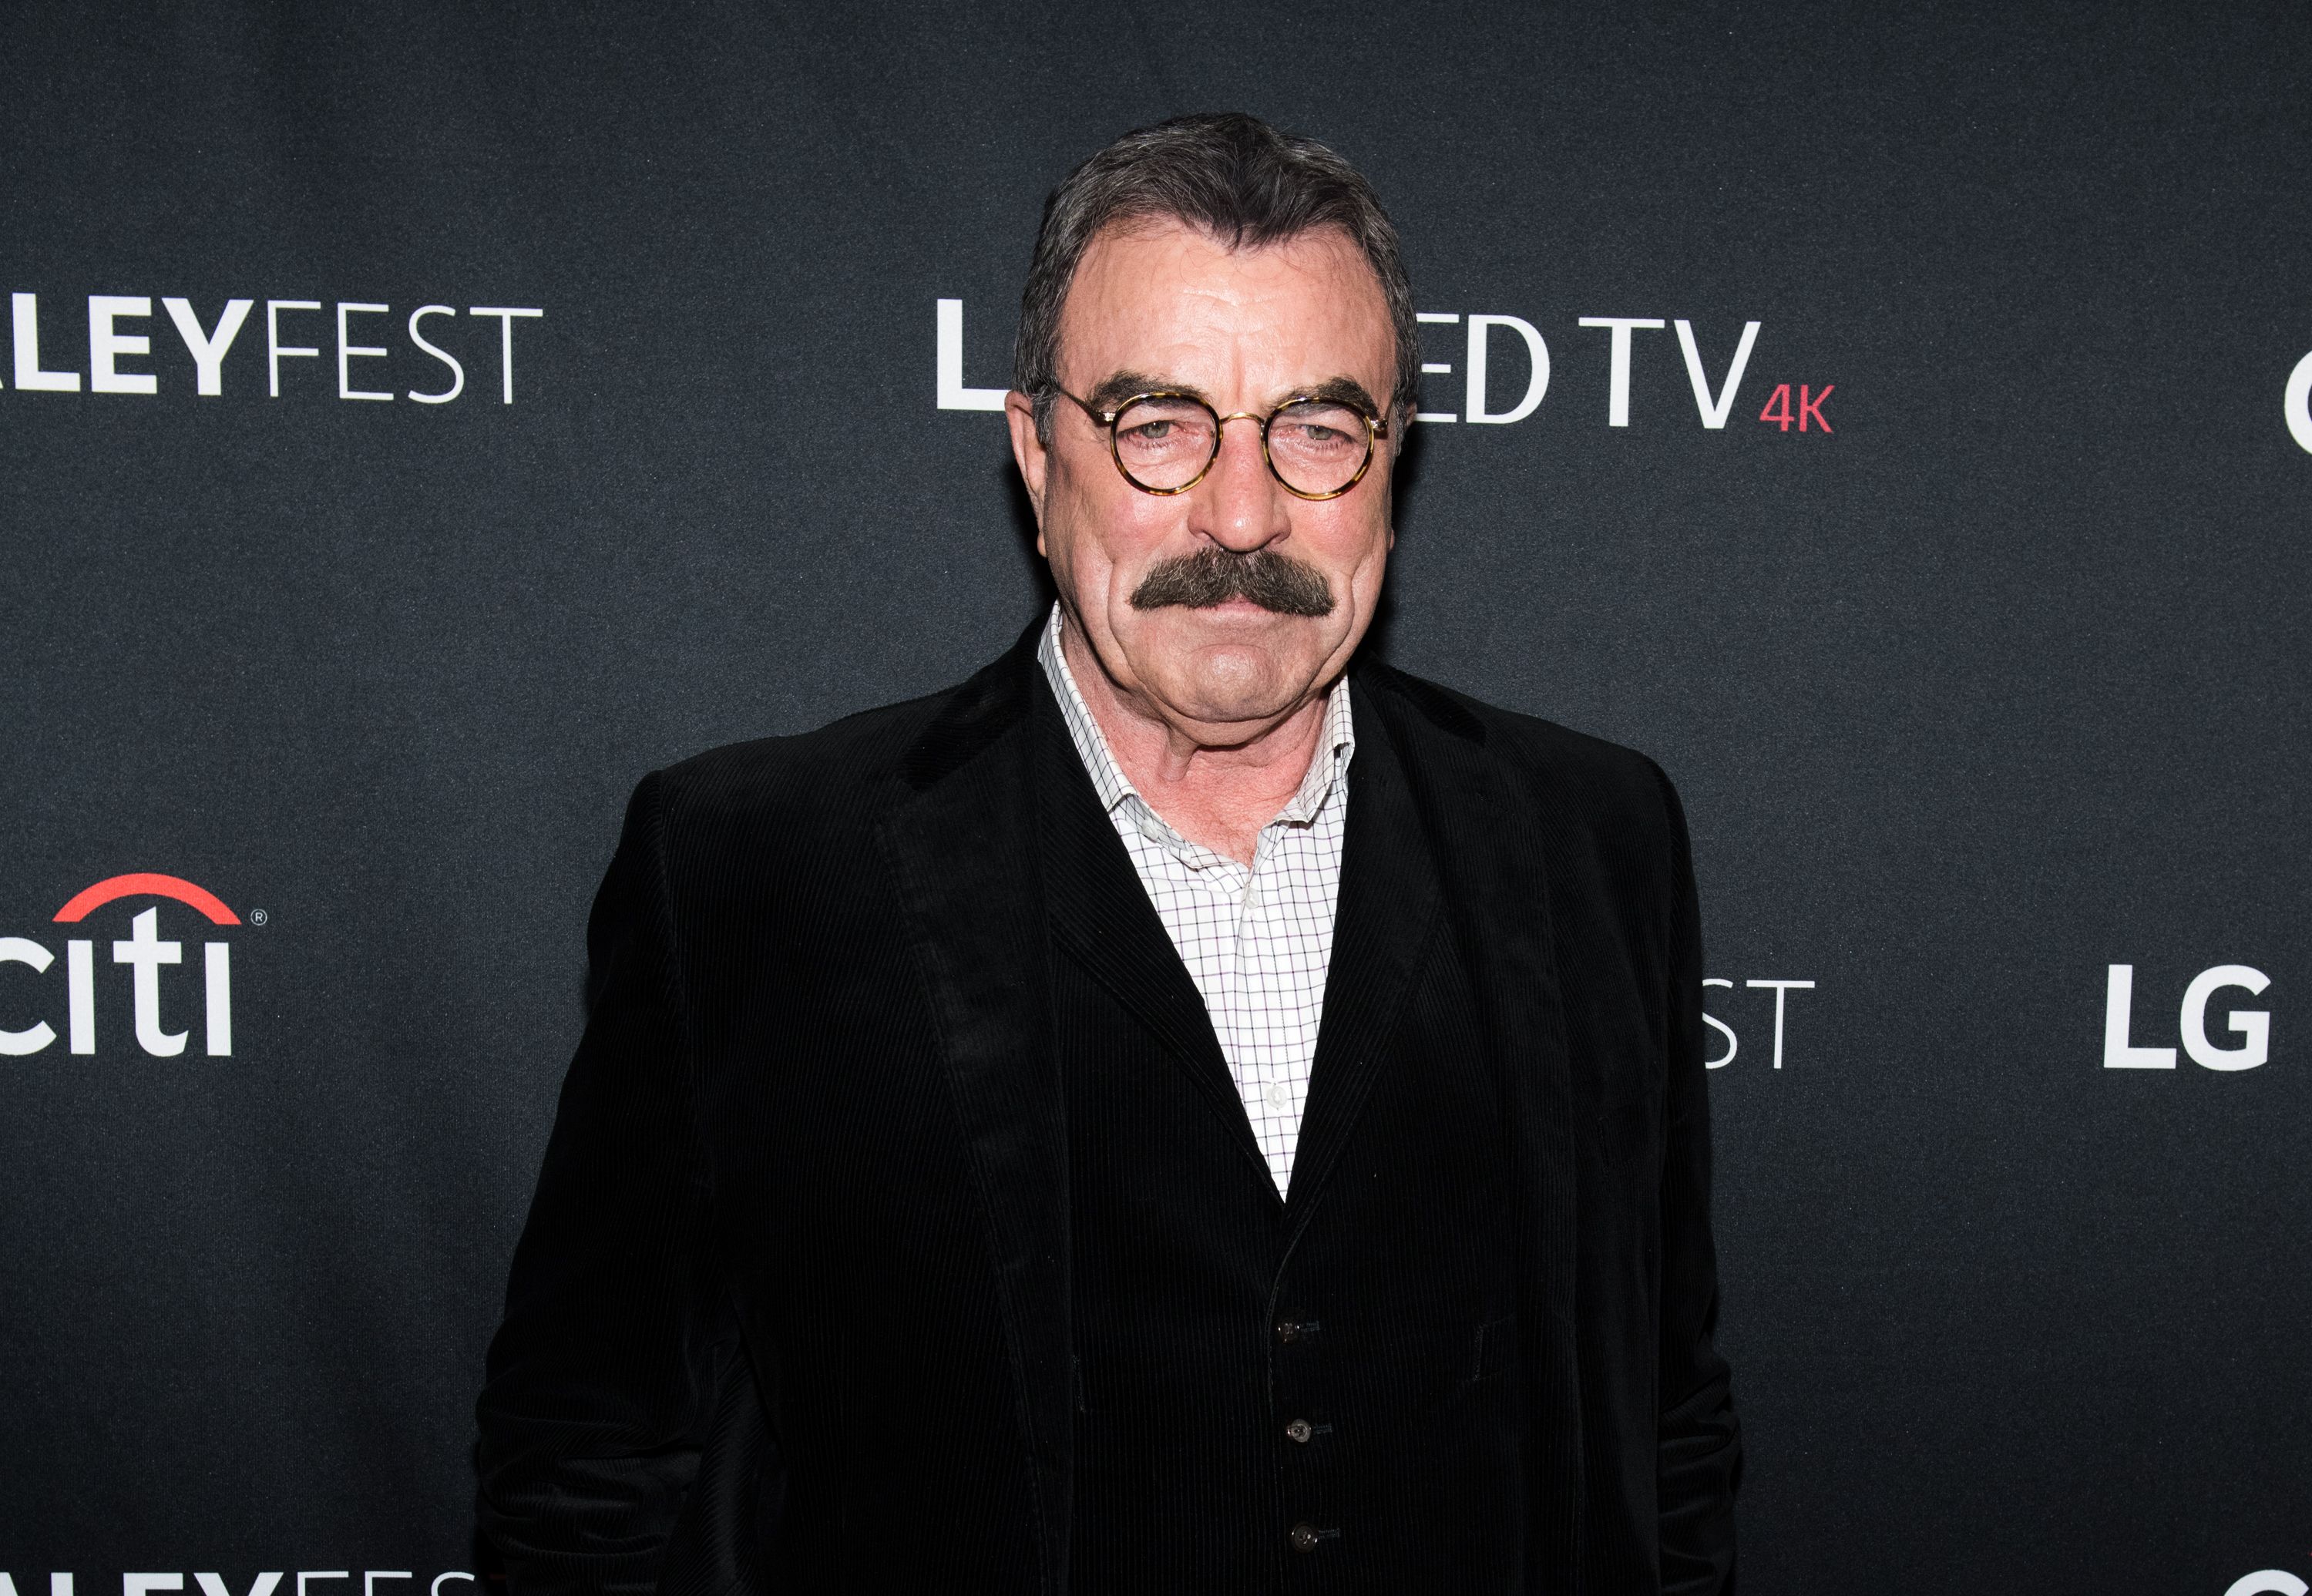 Actor Tom Selleck at the "Blue Bloods" screening during PaleyFest NY 2017 at The Paley Center for Media on October 16, 2017 | Photo: Getty Images